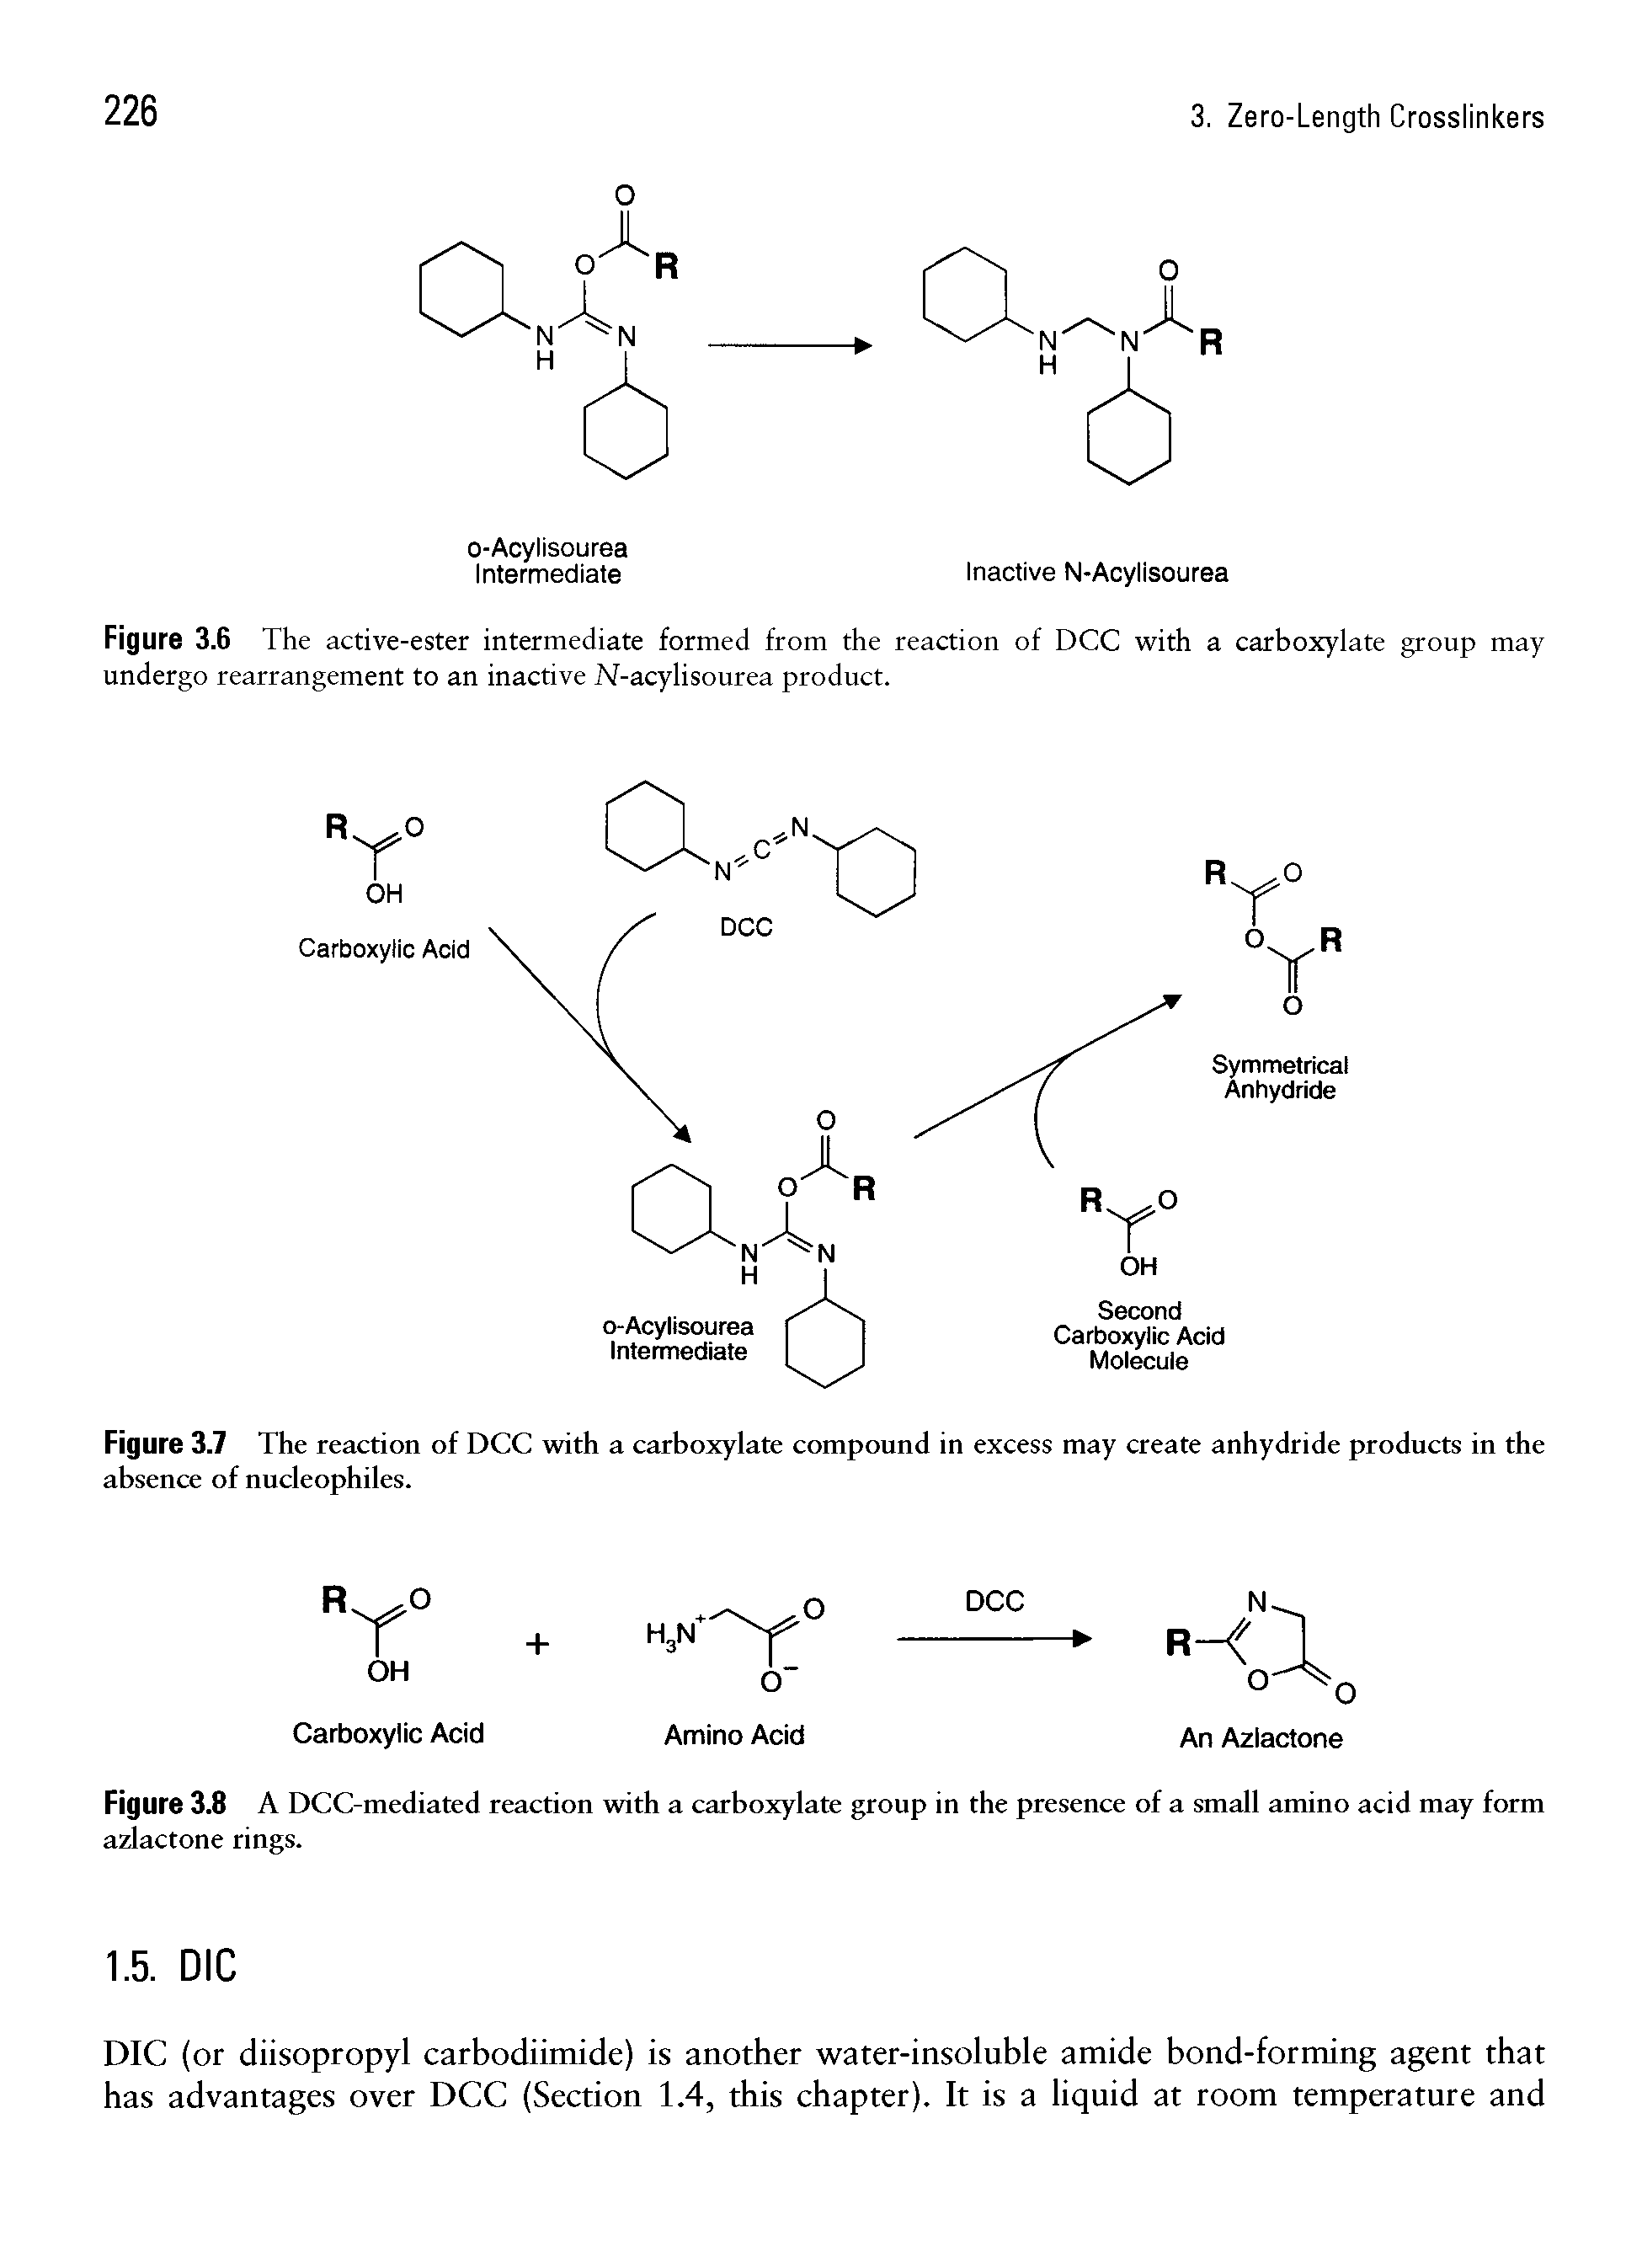 Figure 3.7 The reaction of DCC with a carboxylate compound in excess may create anhydride products in the absence of nucleophiles.